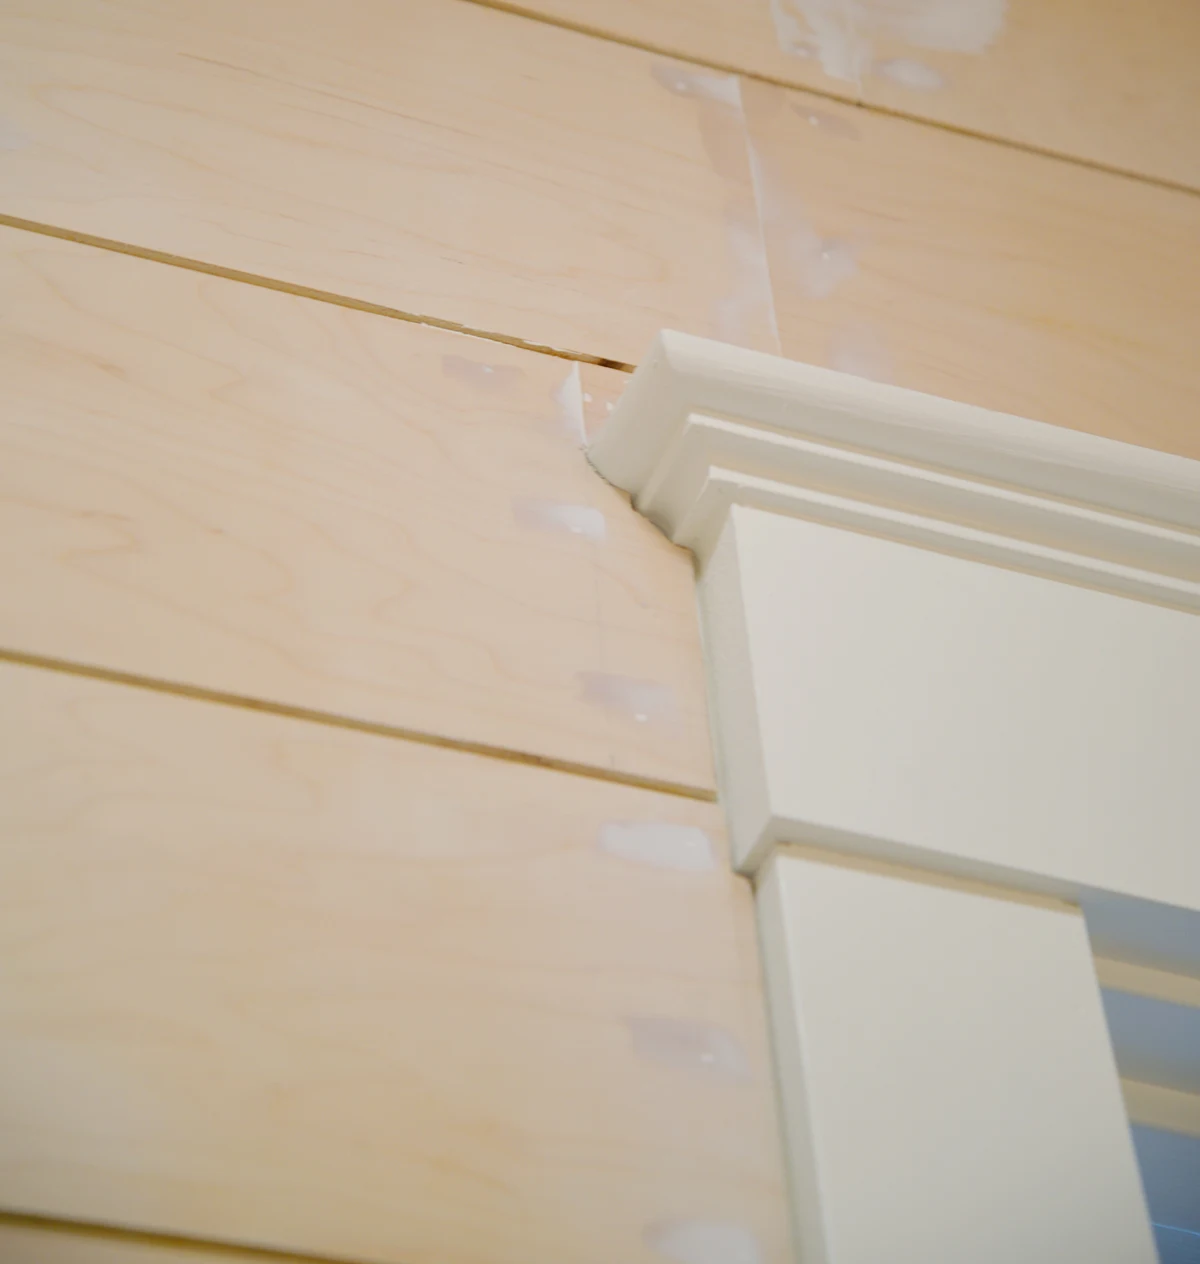 how to shiplap around doors, how to install a shiplap wall, cost of shiplap, shiplap around windows